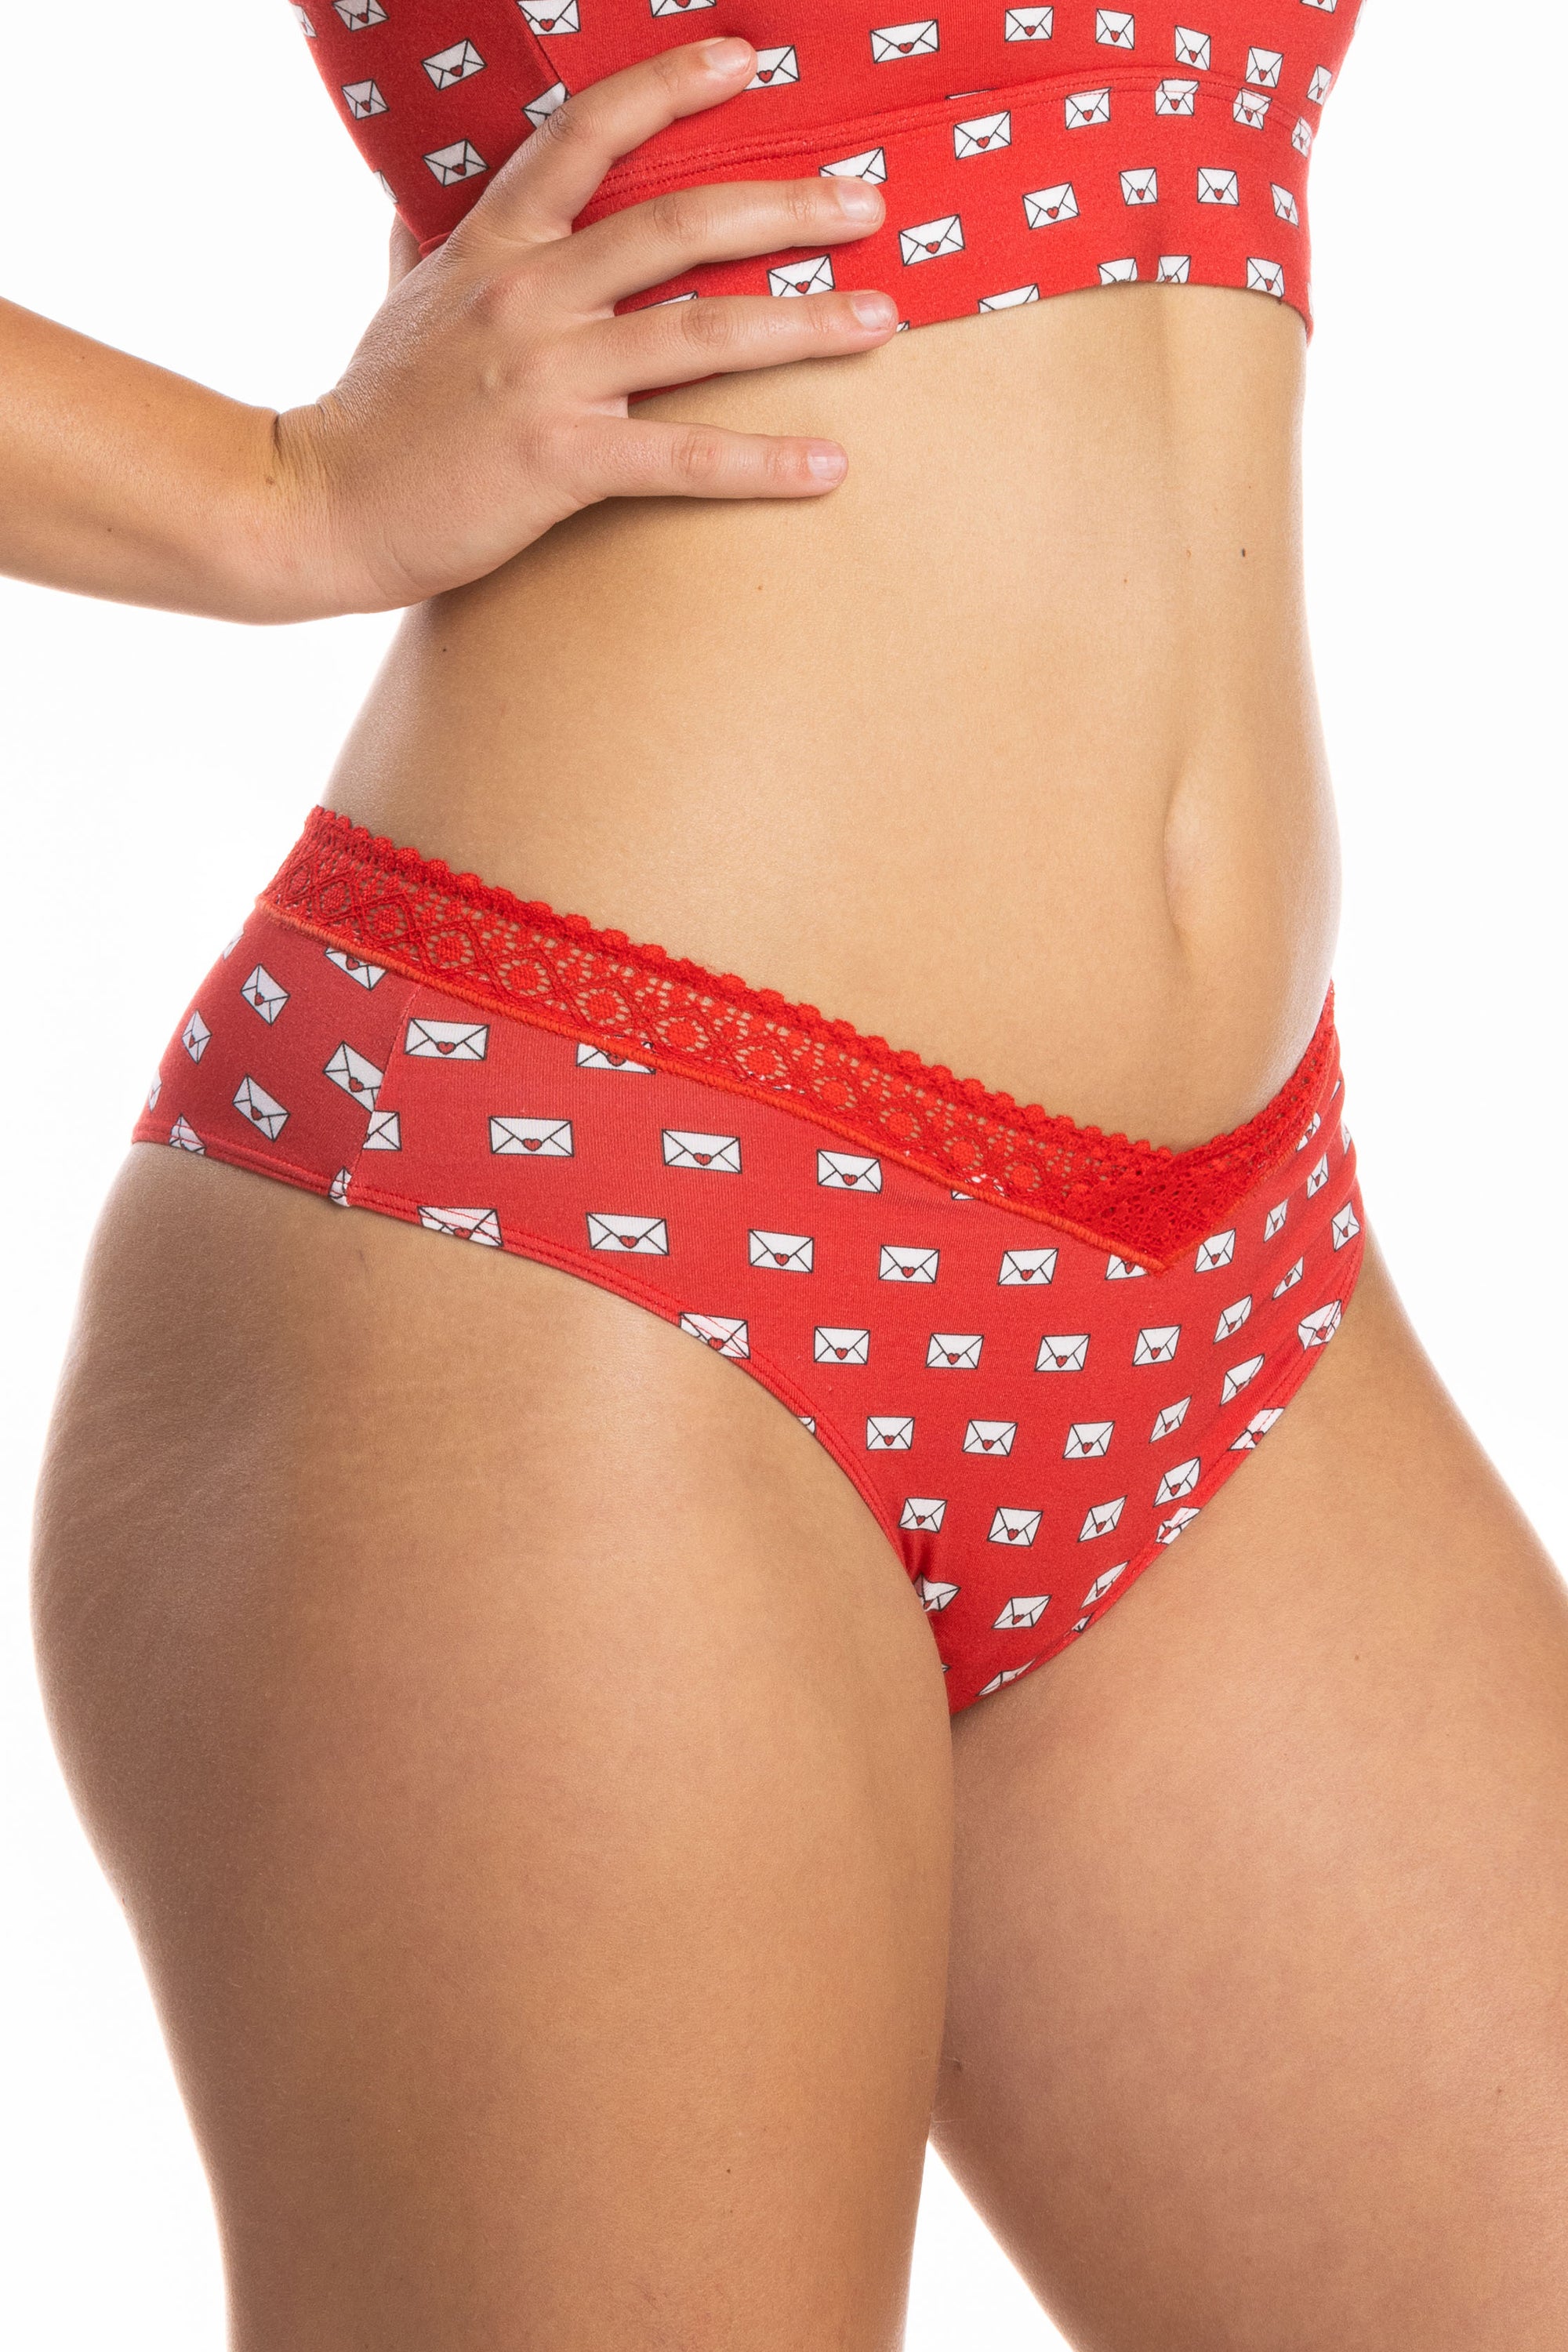 Adore Me Women's Colete Cheeky Panty 4x / Printed Lace C06 Red. : Target